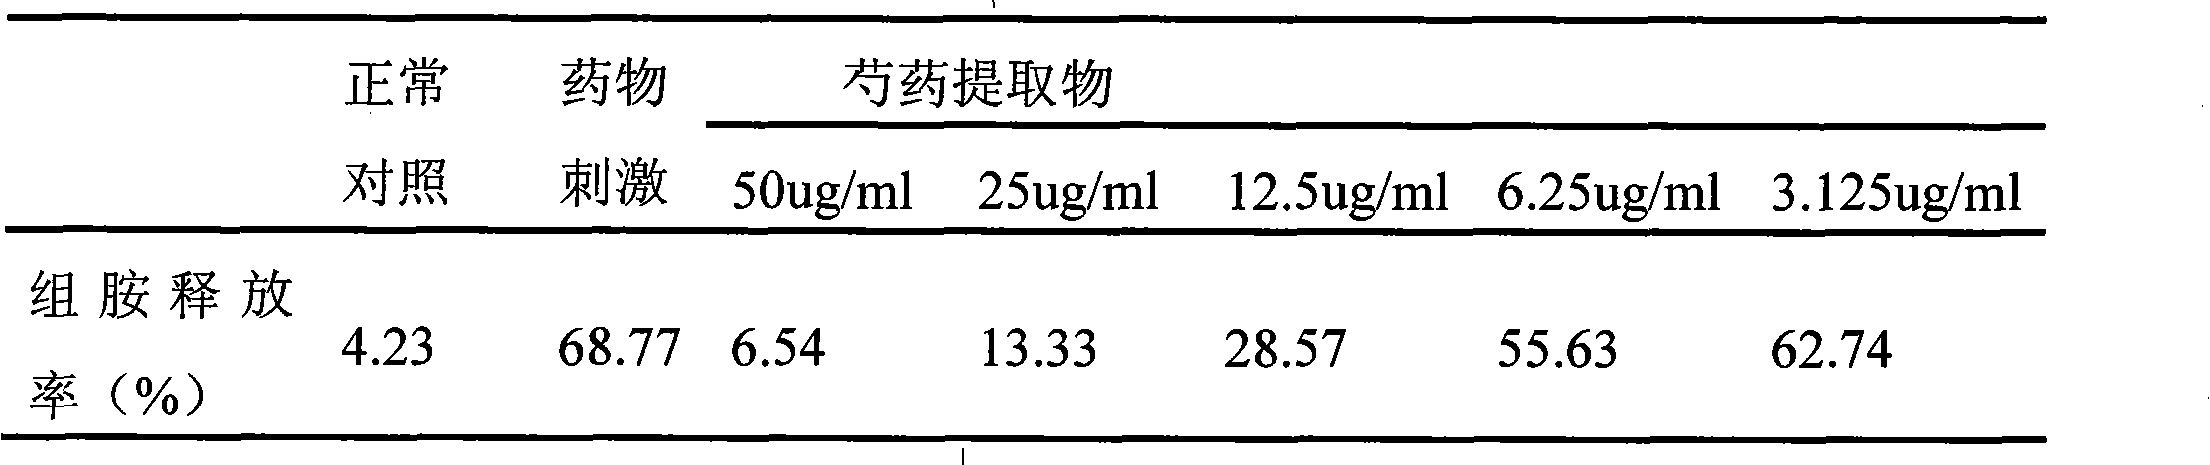 Application method of natural plant peony extract